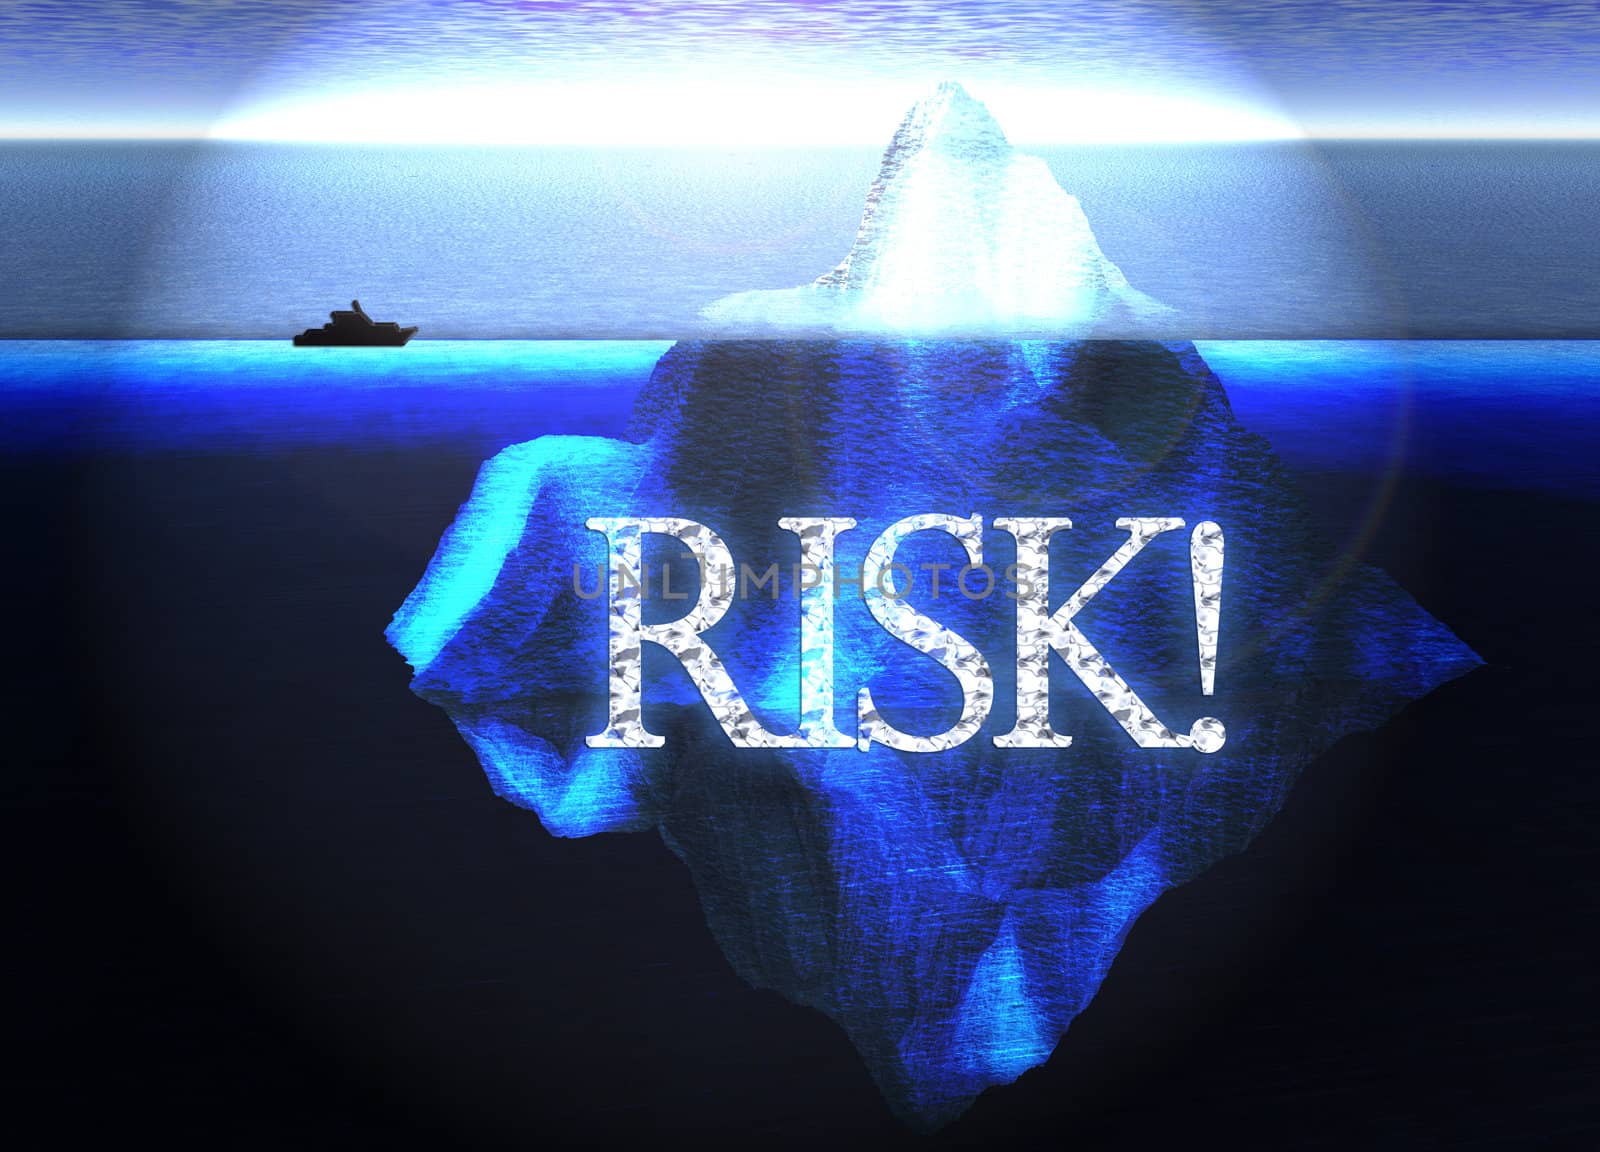 Floating Iceberg in the Open Ocean with Small Boat and Risk Text by bobbigmac